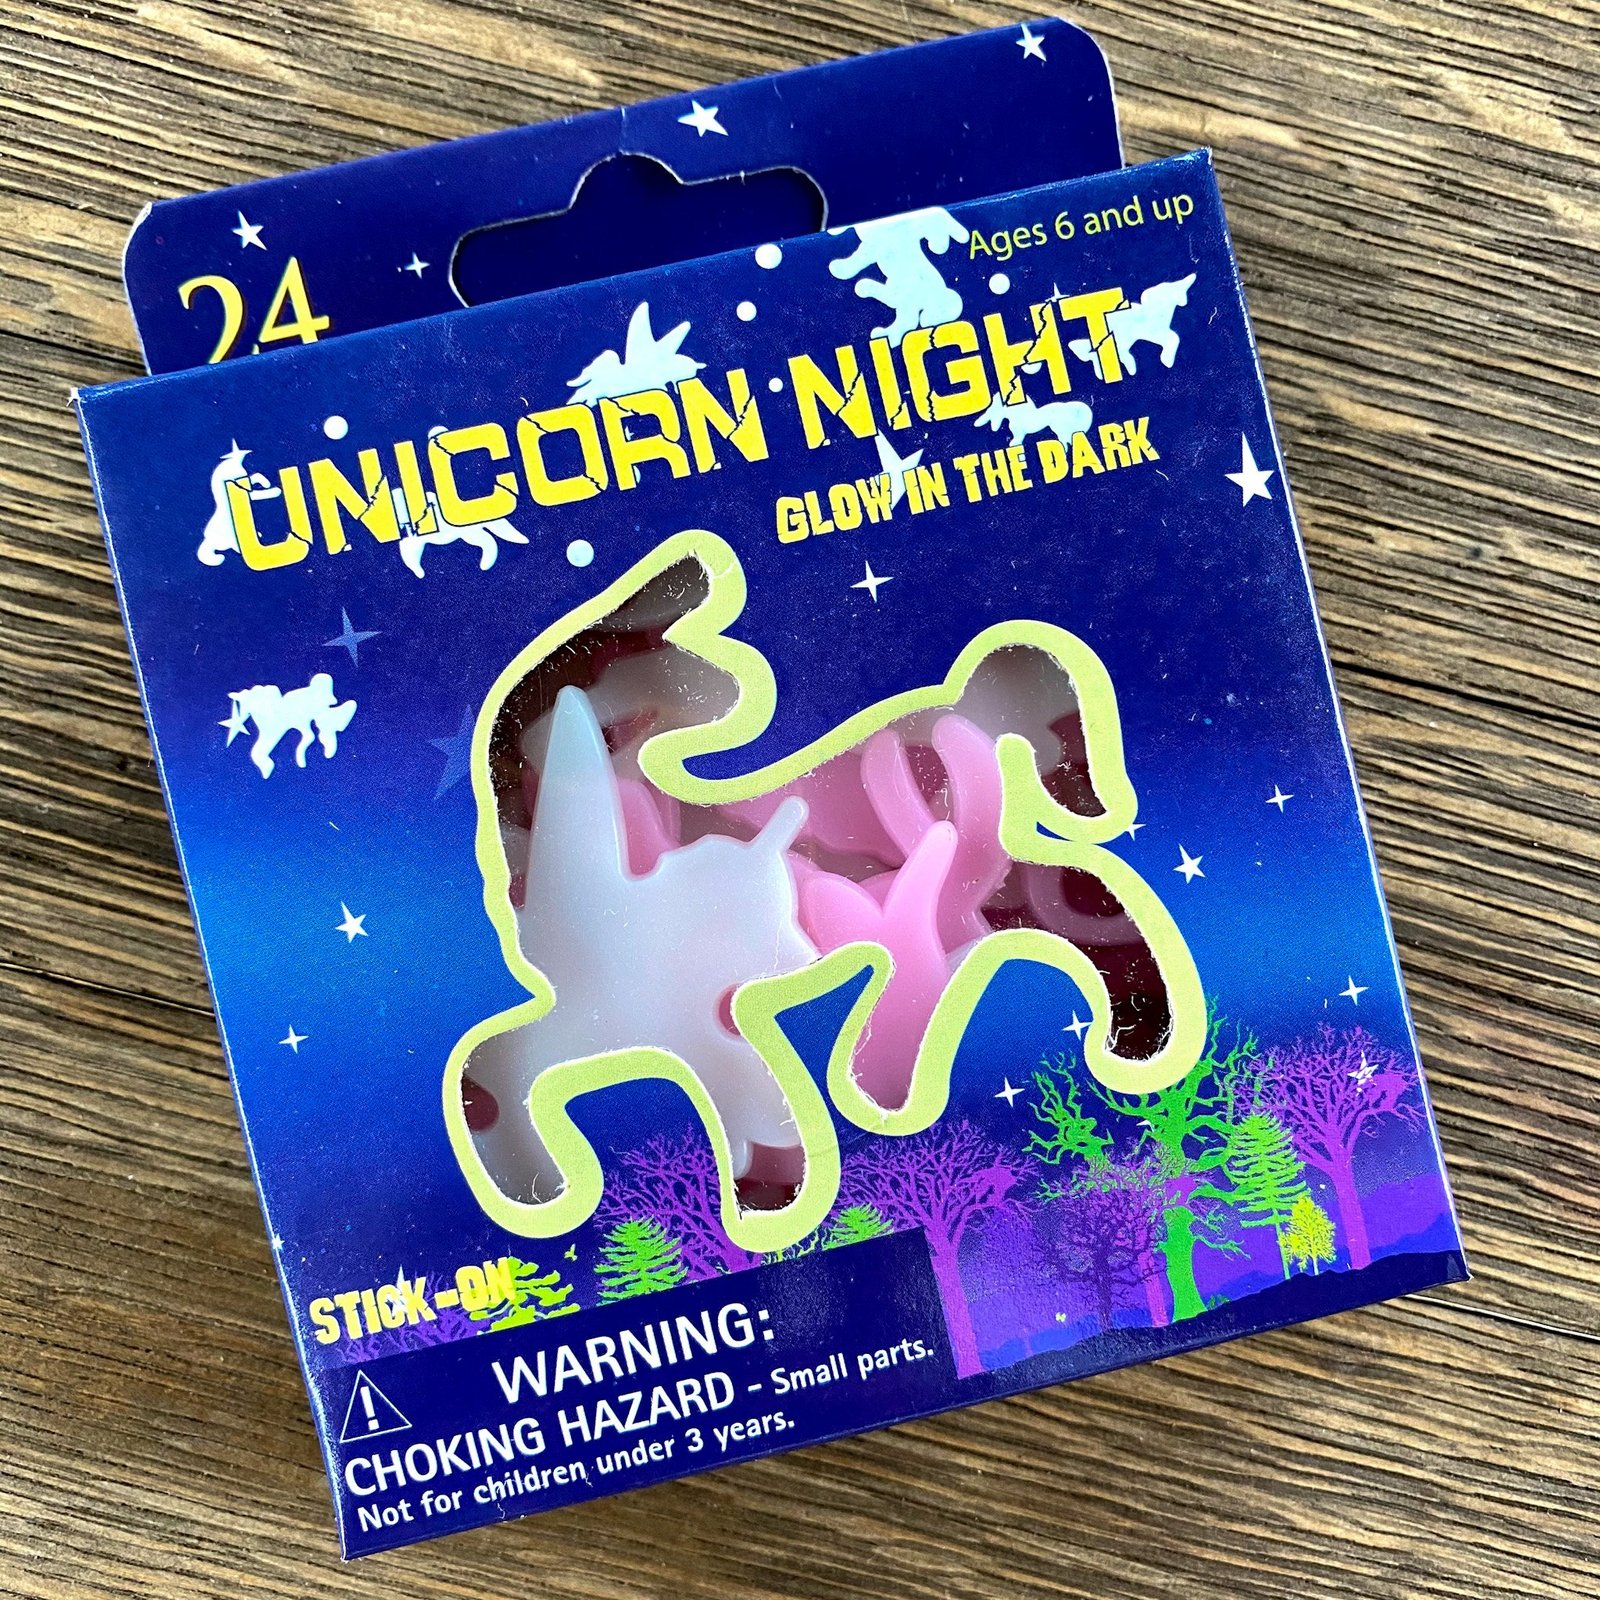 NOVELTY WHITE GLOW IN THE DARK UNICORN WALL STICKERS 24 PIECES NEW IN GIFT BOX 